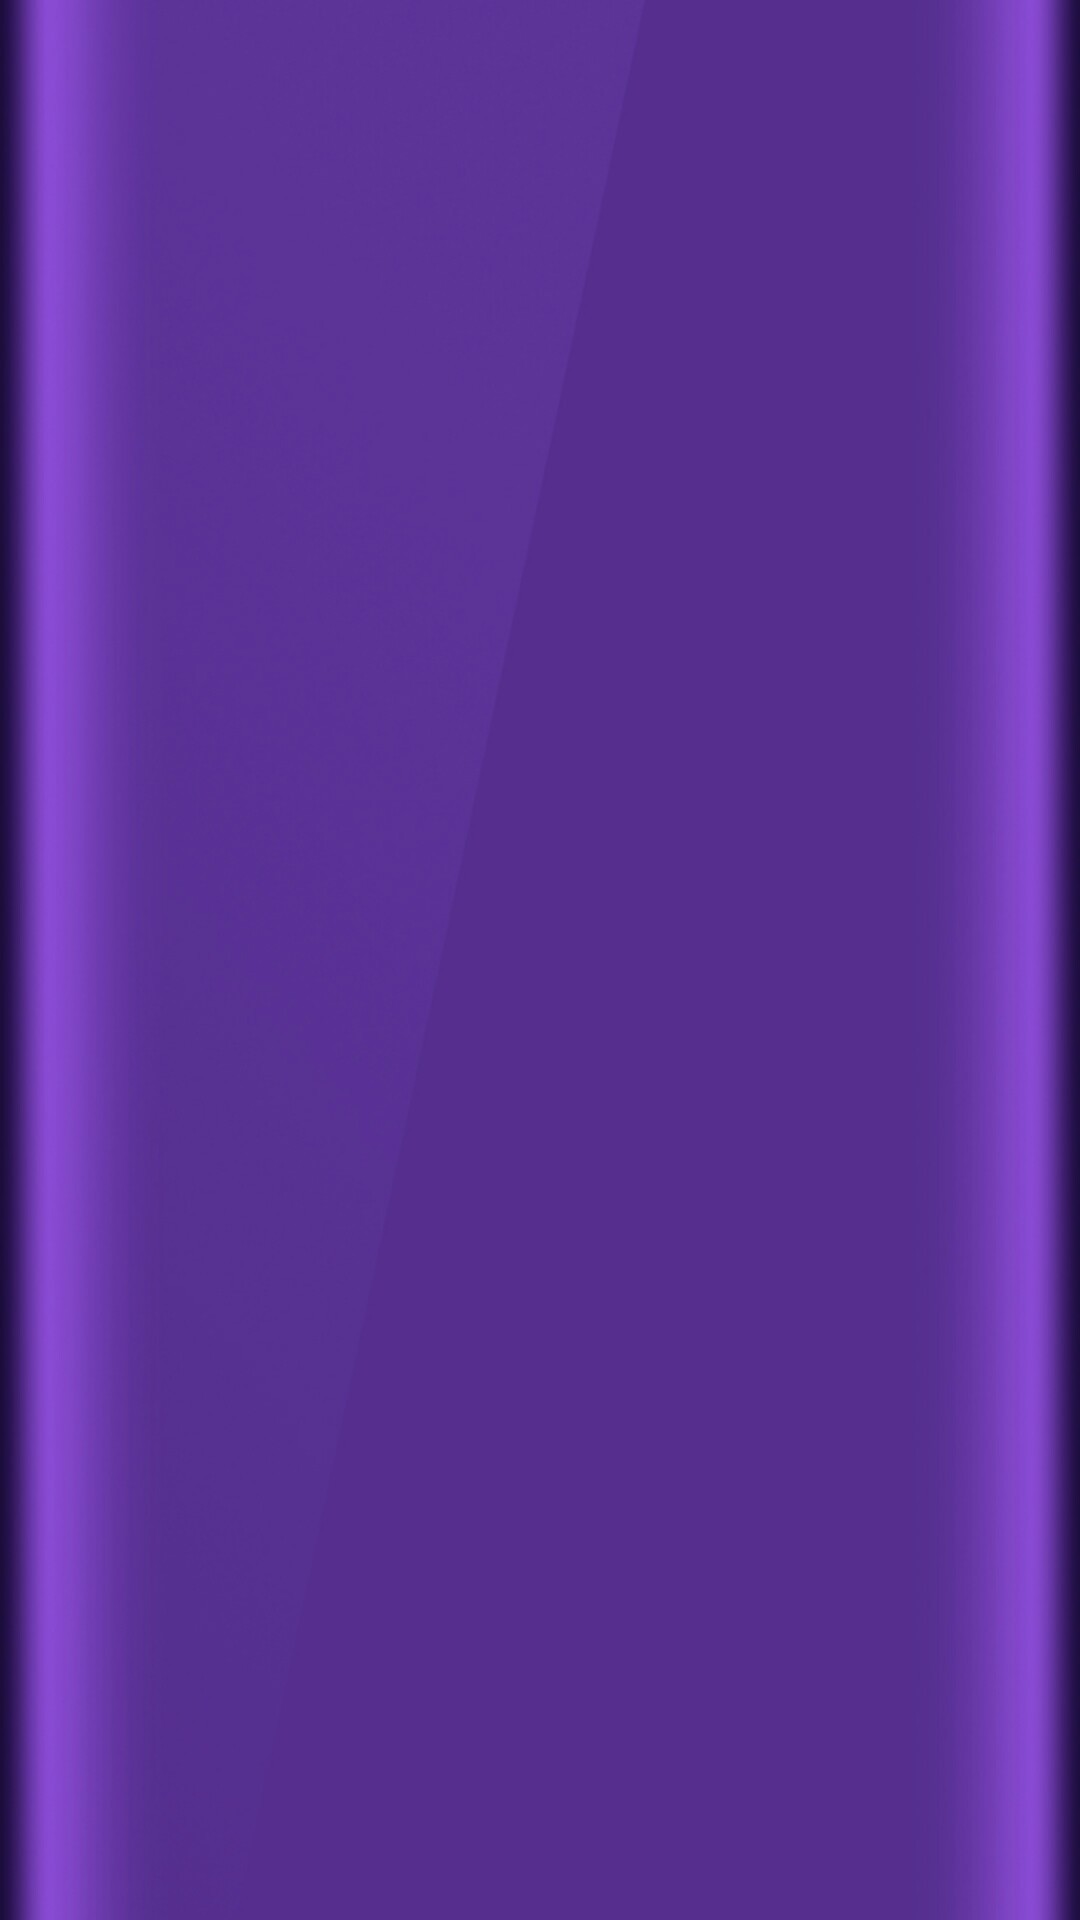 Purple Wallpaper, Phone Backgrounds, Iphone Wallpapers, - Lilac - HD Wallpaper 